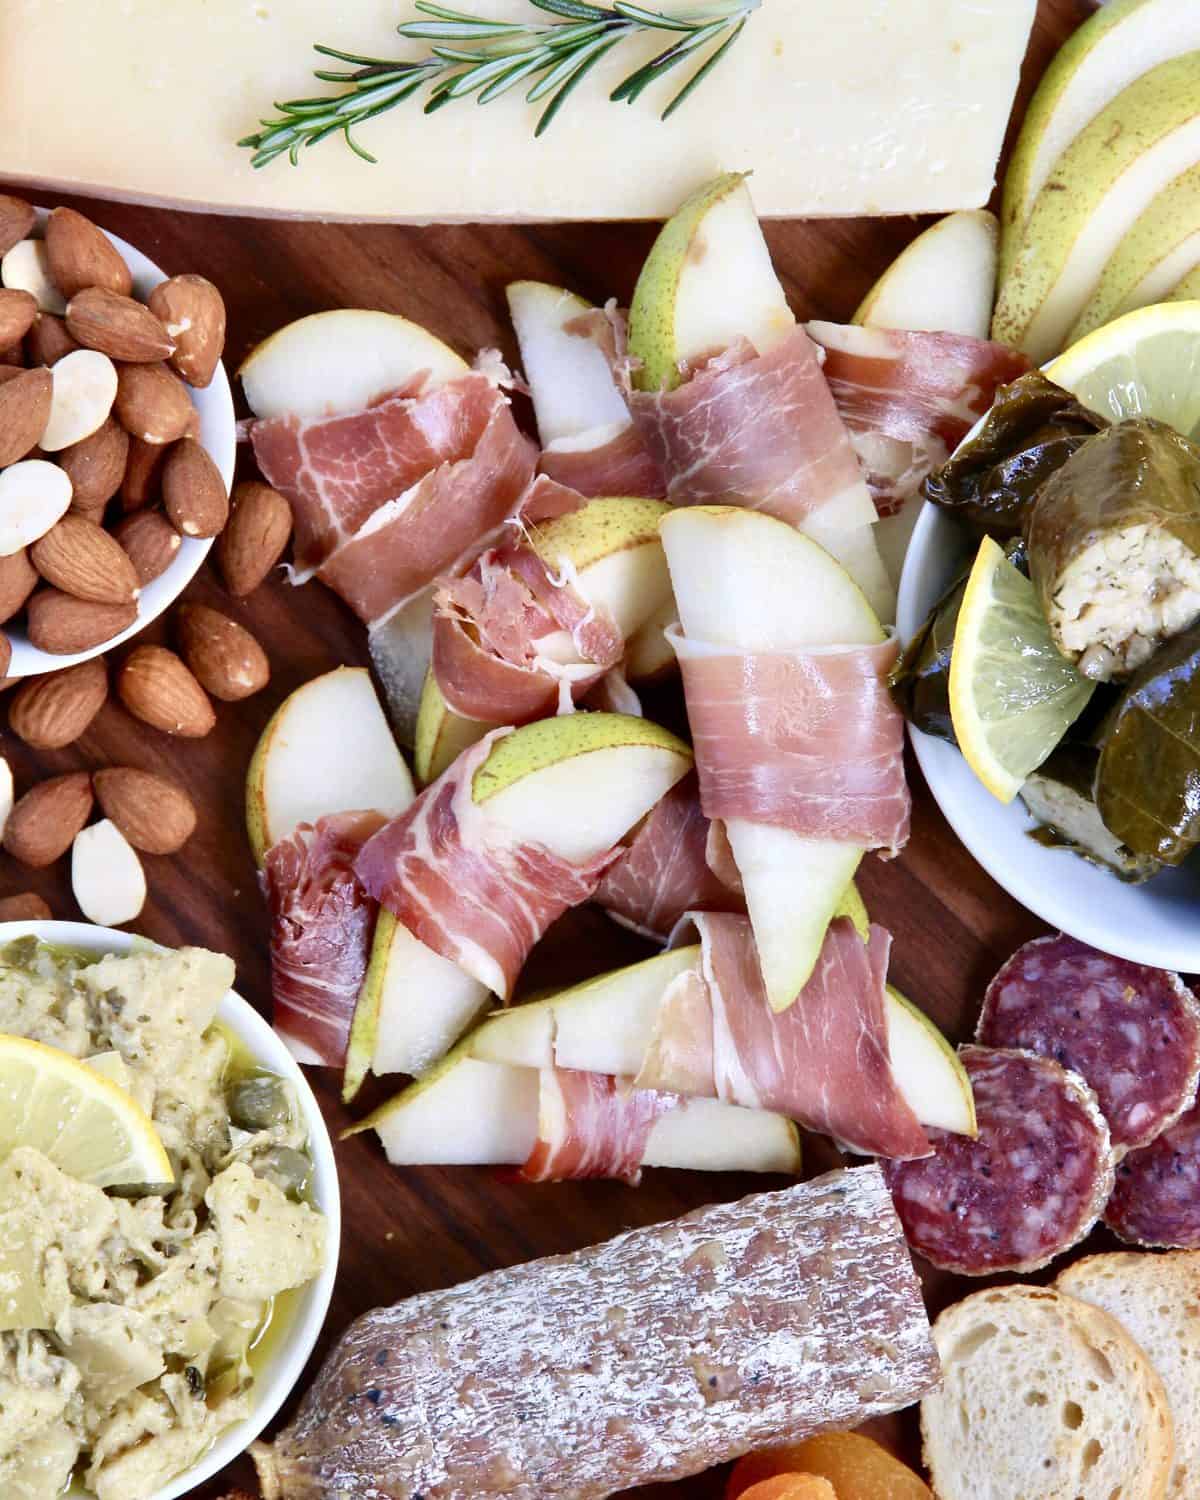 Holiday Cheese and Charcuterie Board by The BakerMama with Harry & David